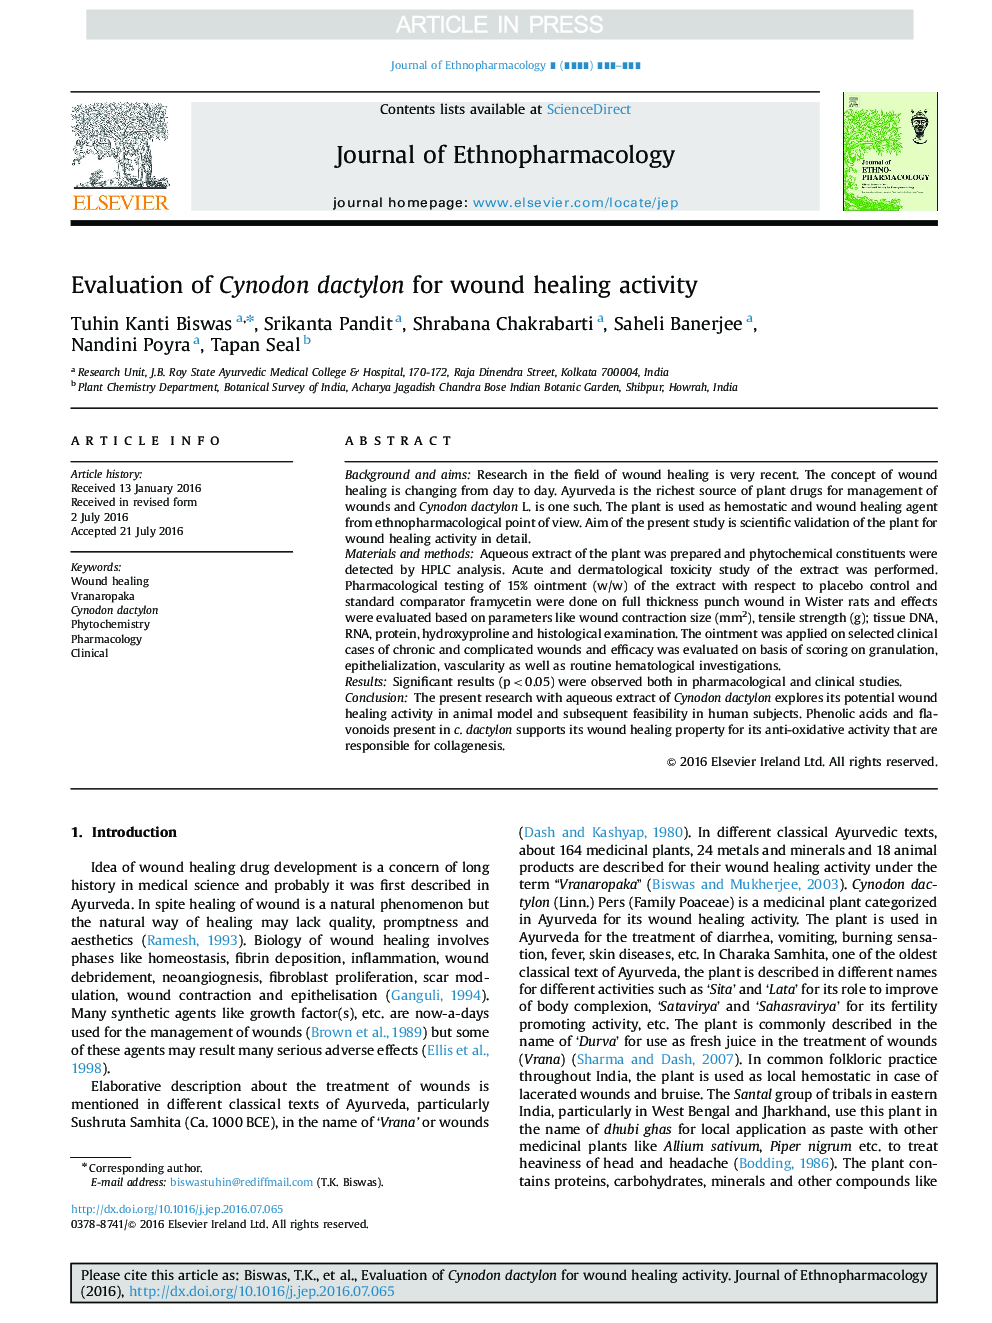 Evaluation of Cynodon dactylon for wound healing activity